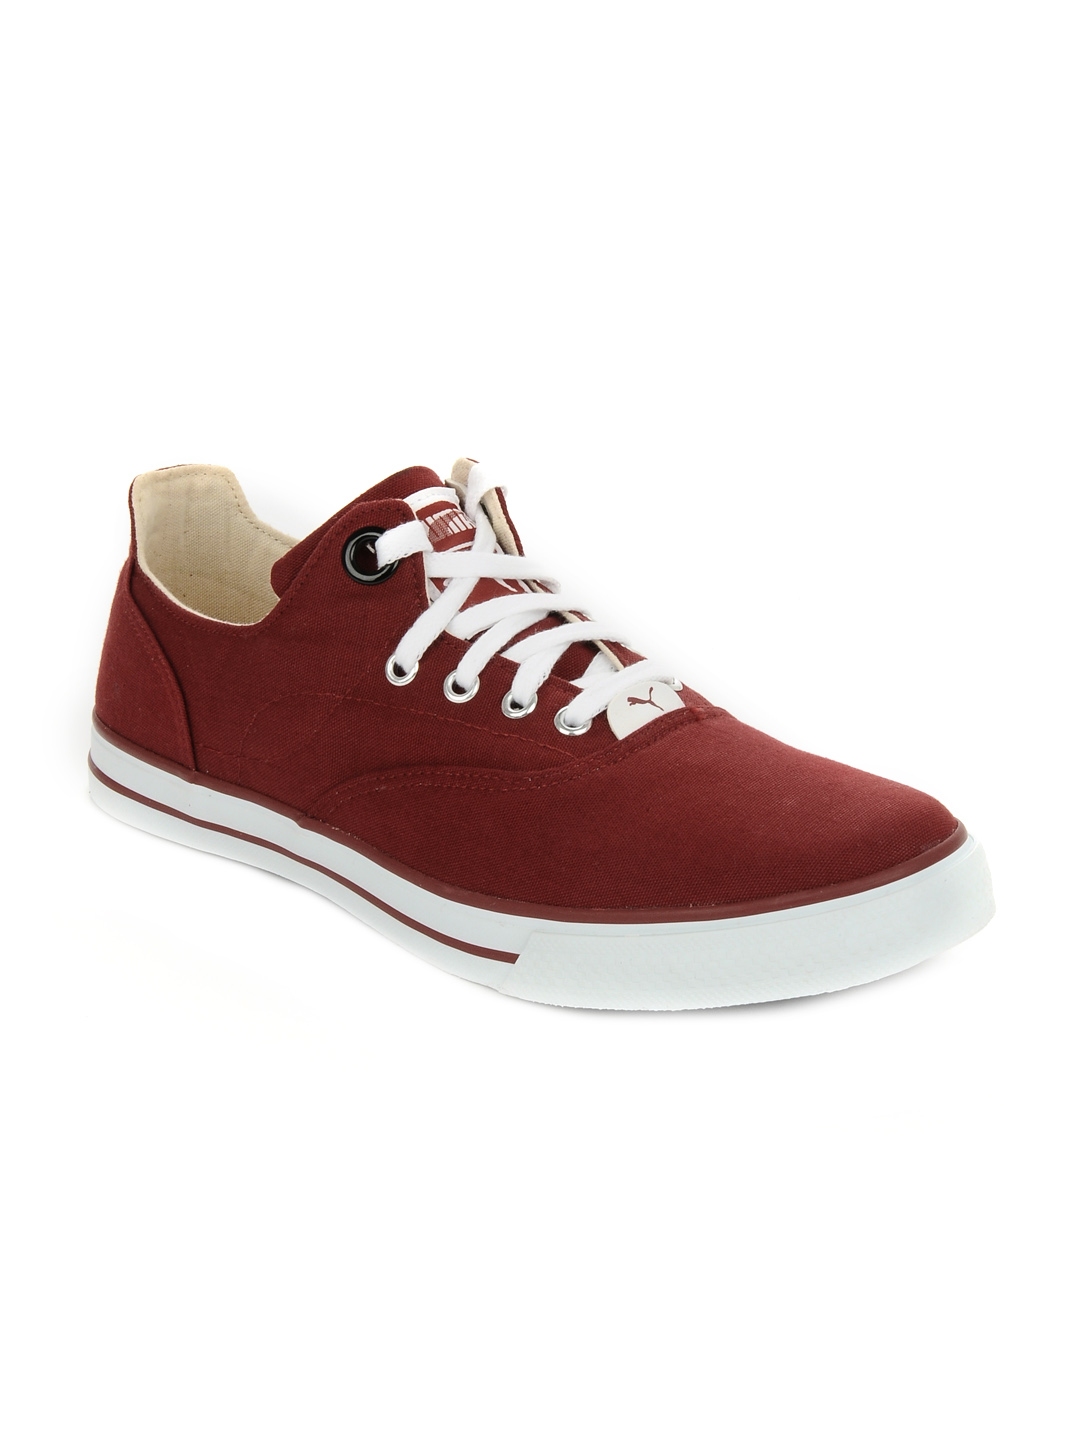 Buy Puma Unisex Red Limnos Casual Shoes - Casual Shoes for Unisex 78352 ...